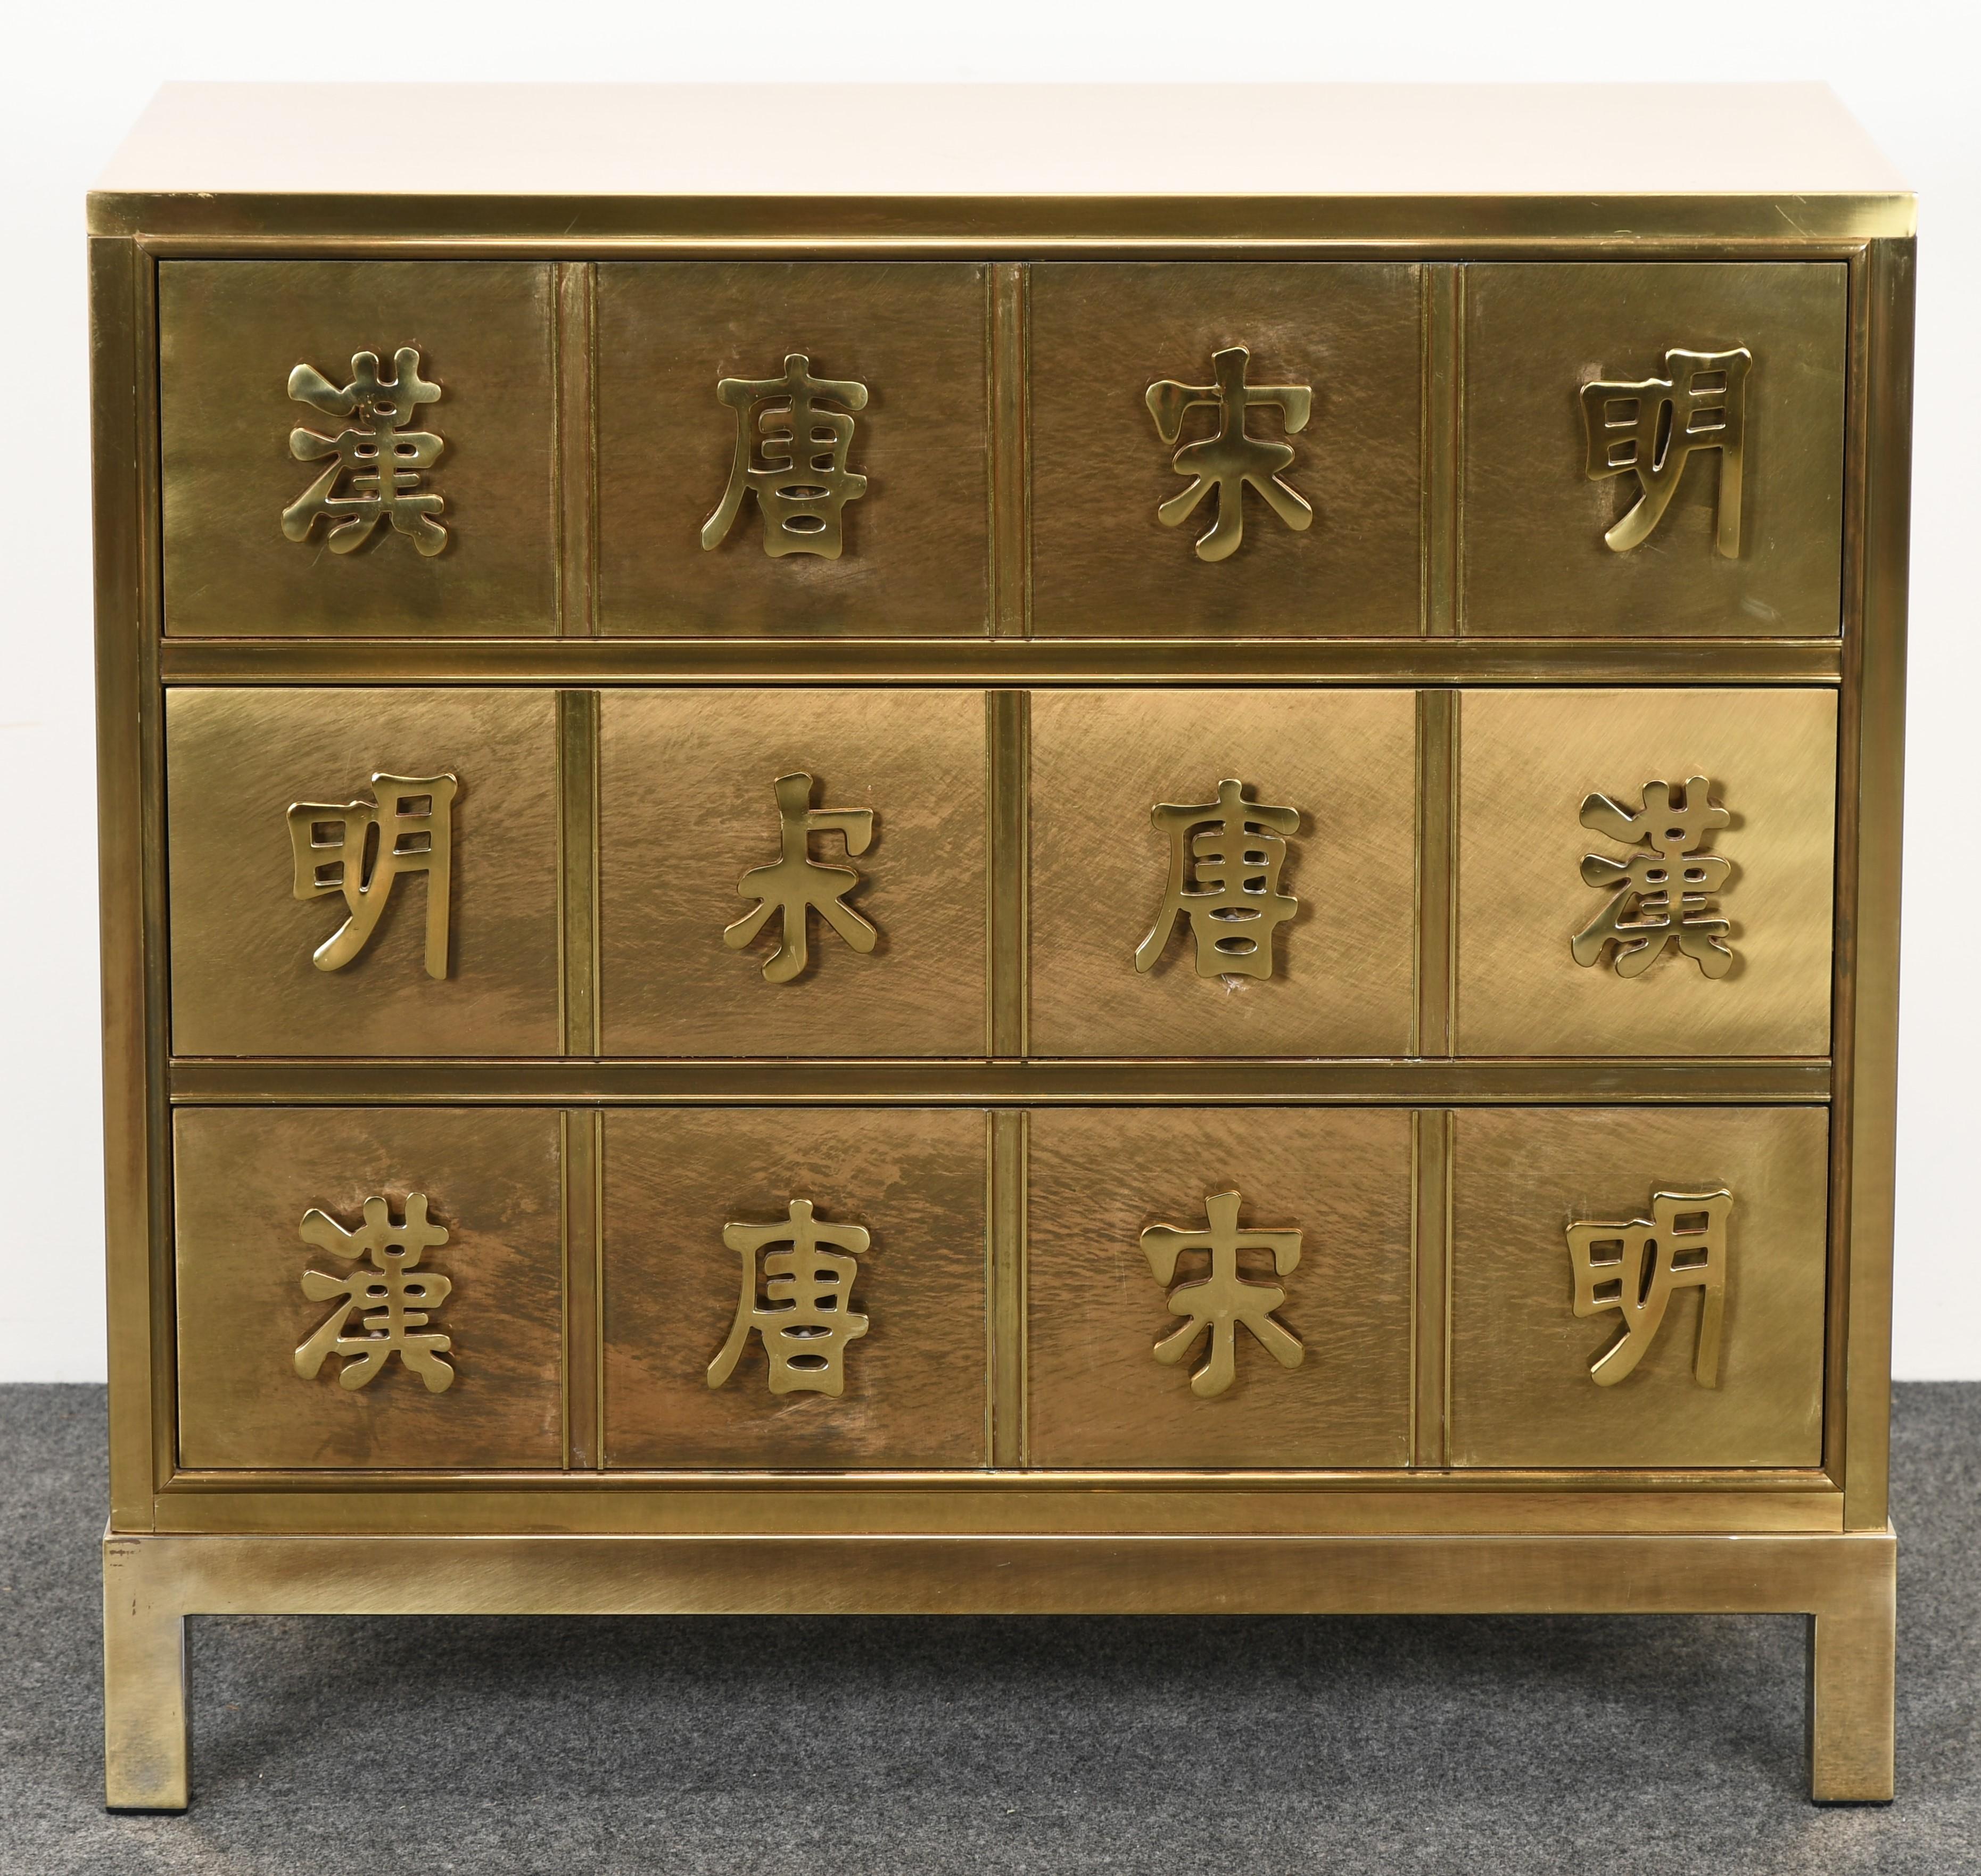 A decorative brass chest by Mastercraft with an Asian motif handles. The chest consists of three drawers for ample storage. Great small scale size for the perfect space. The chest is in good condition with age-appropriate wear. Some variances in